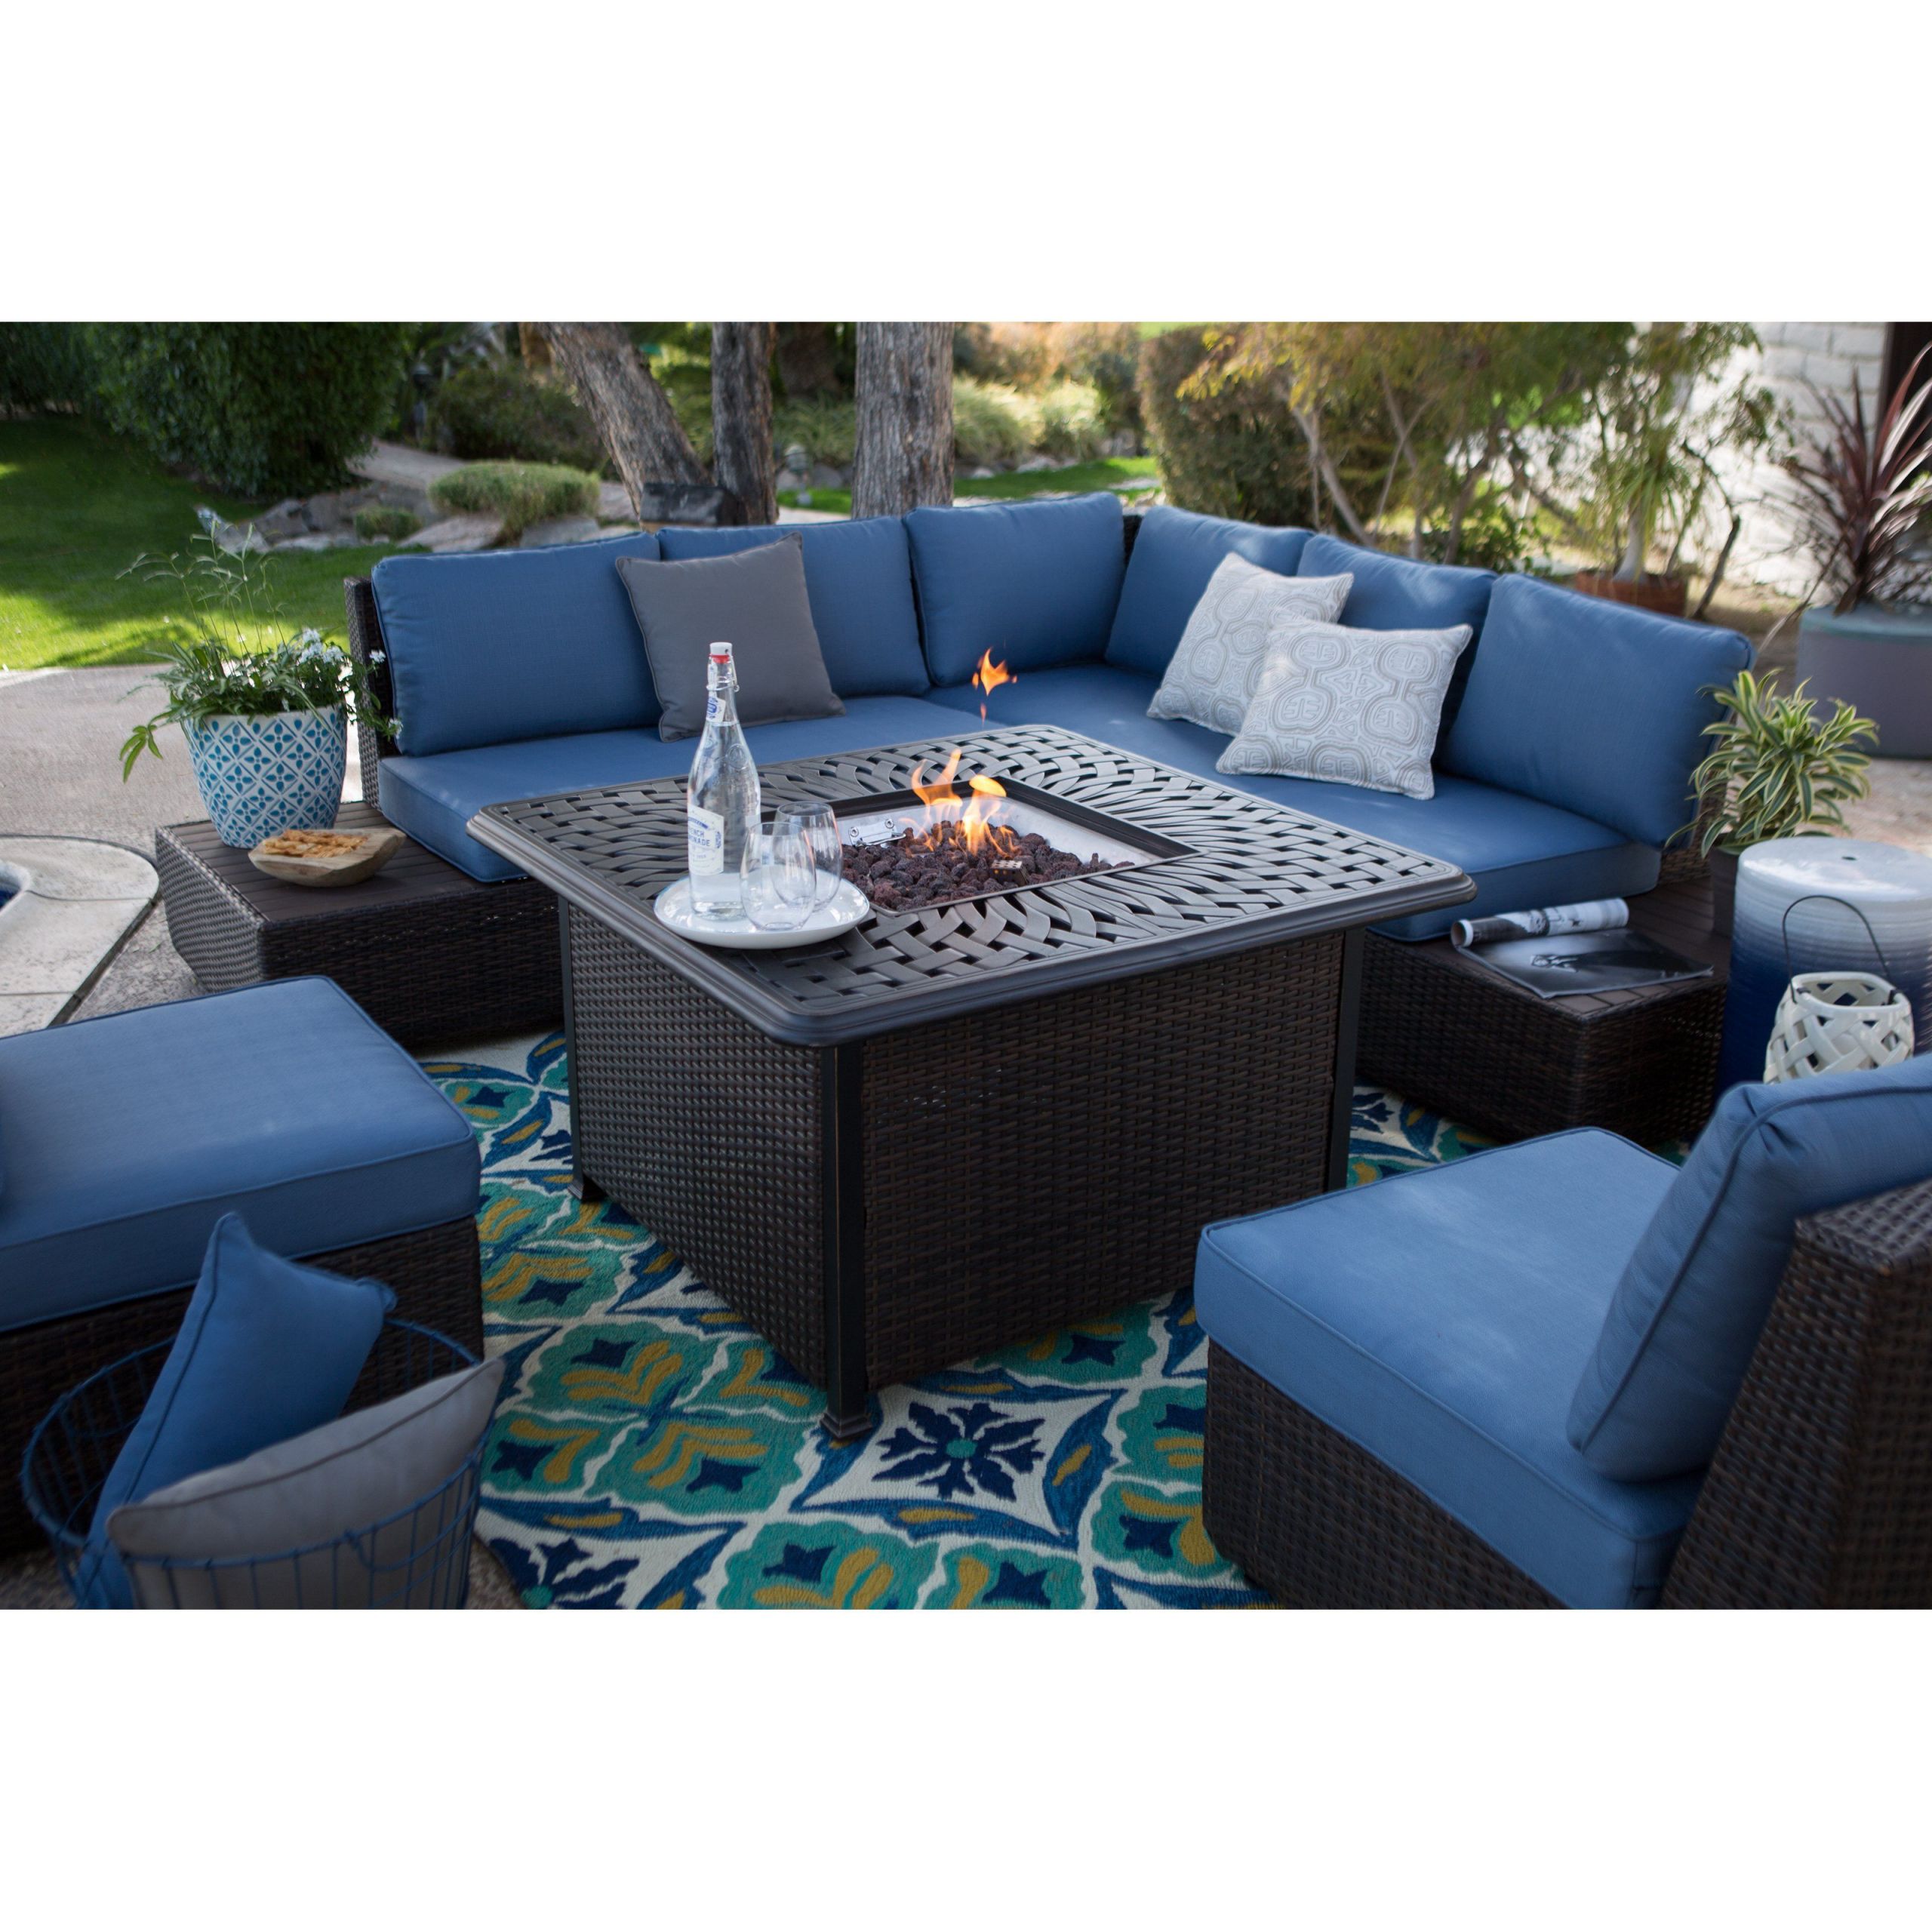 Patio Fire Pit Sets
 Belham Living Luciana Bay Wicker Sofa Sectional Set with